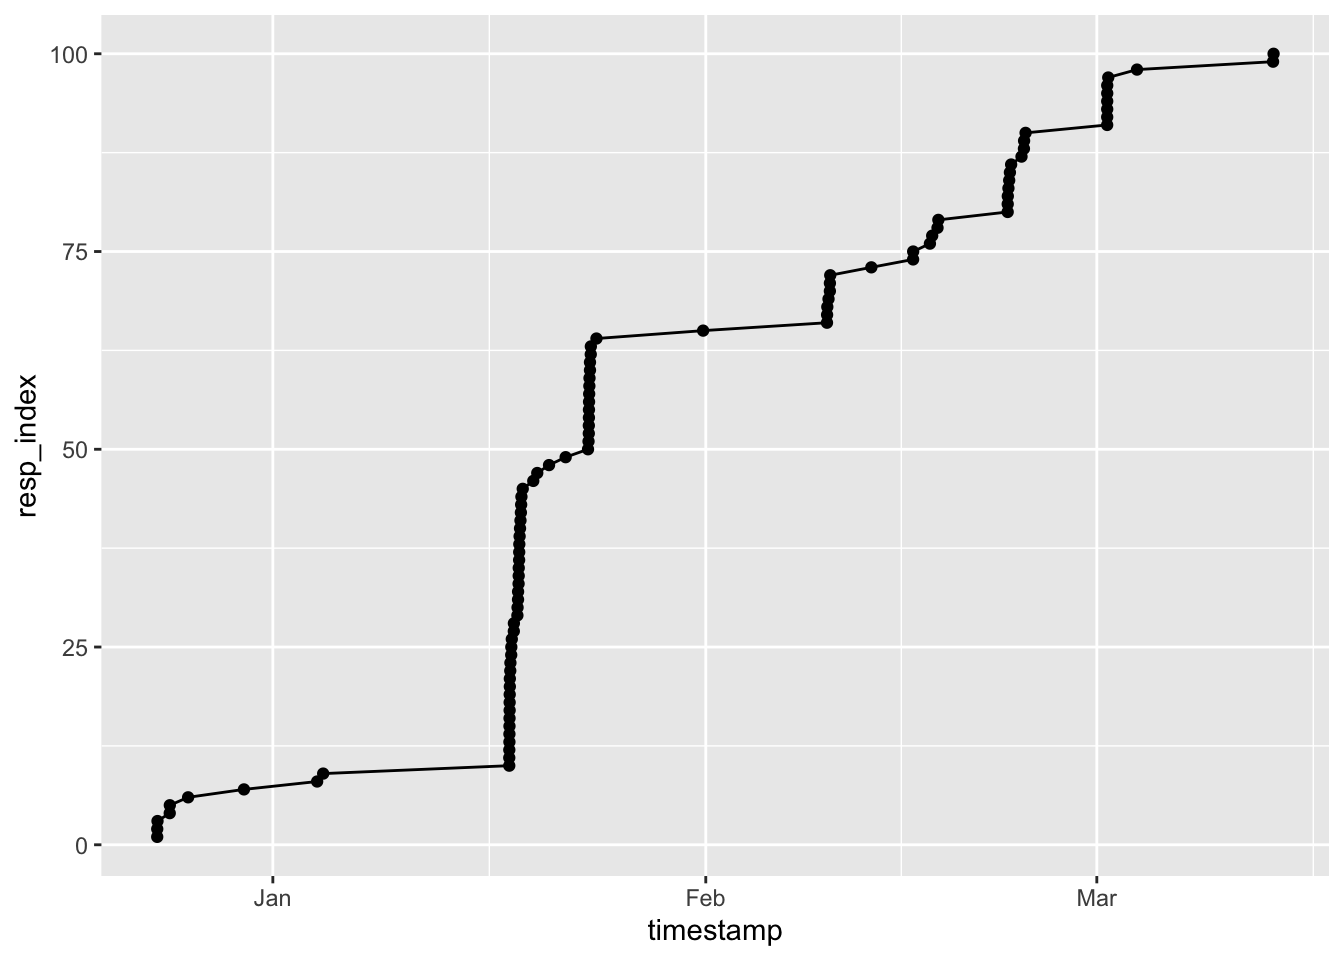 Time series of responses to open science survey